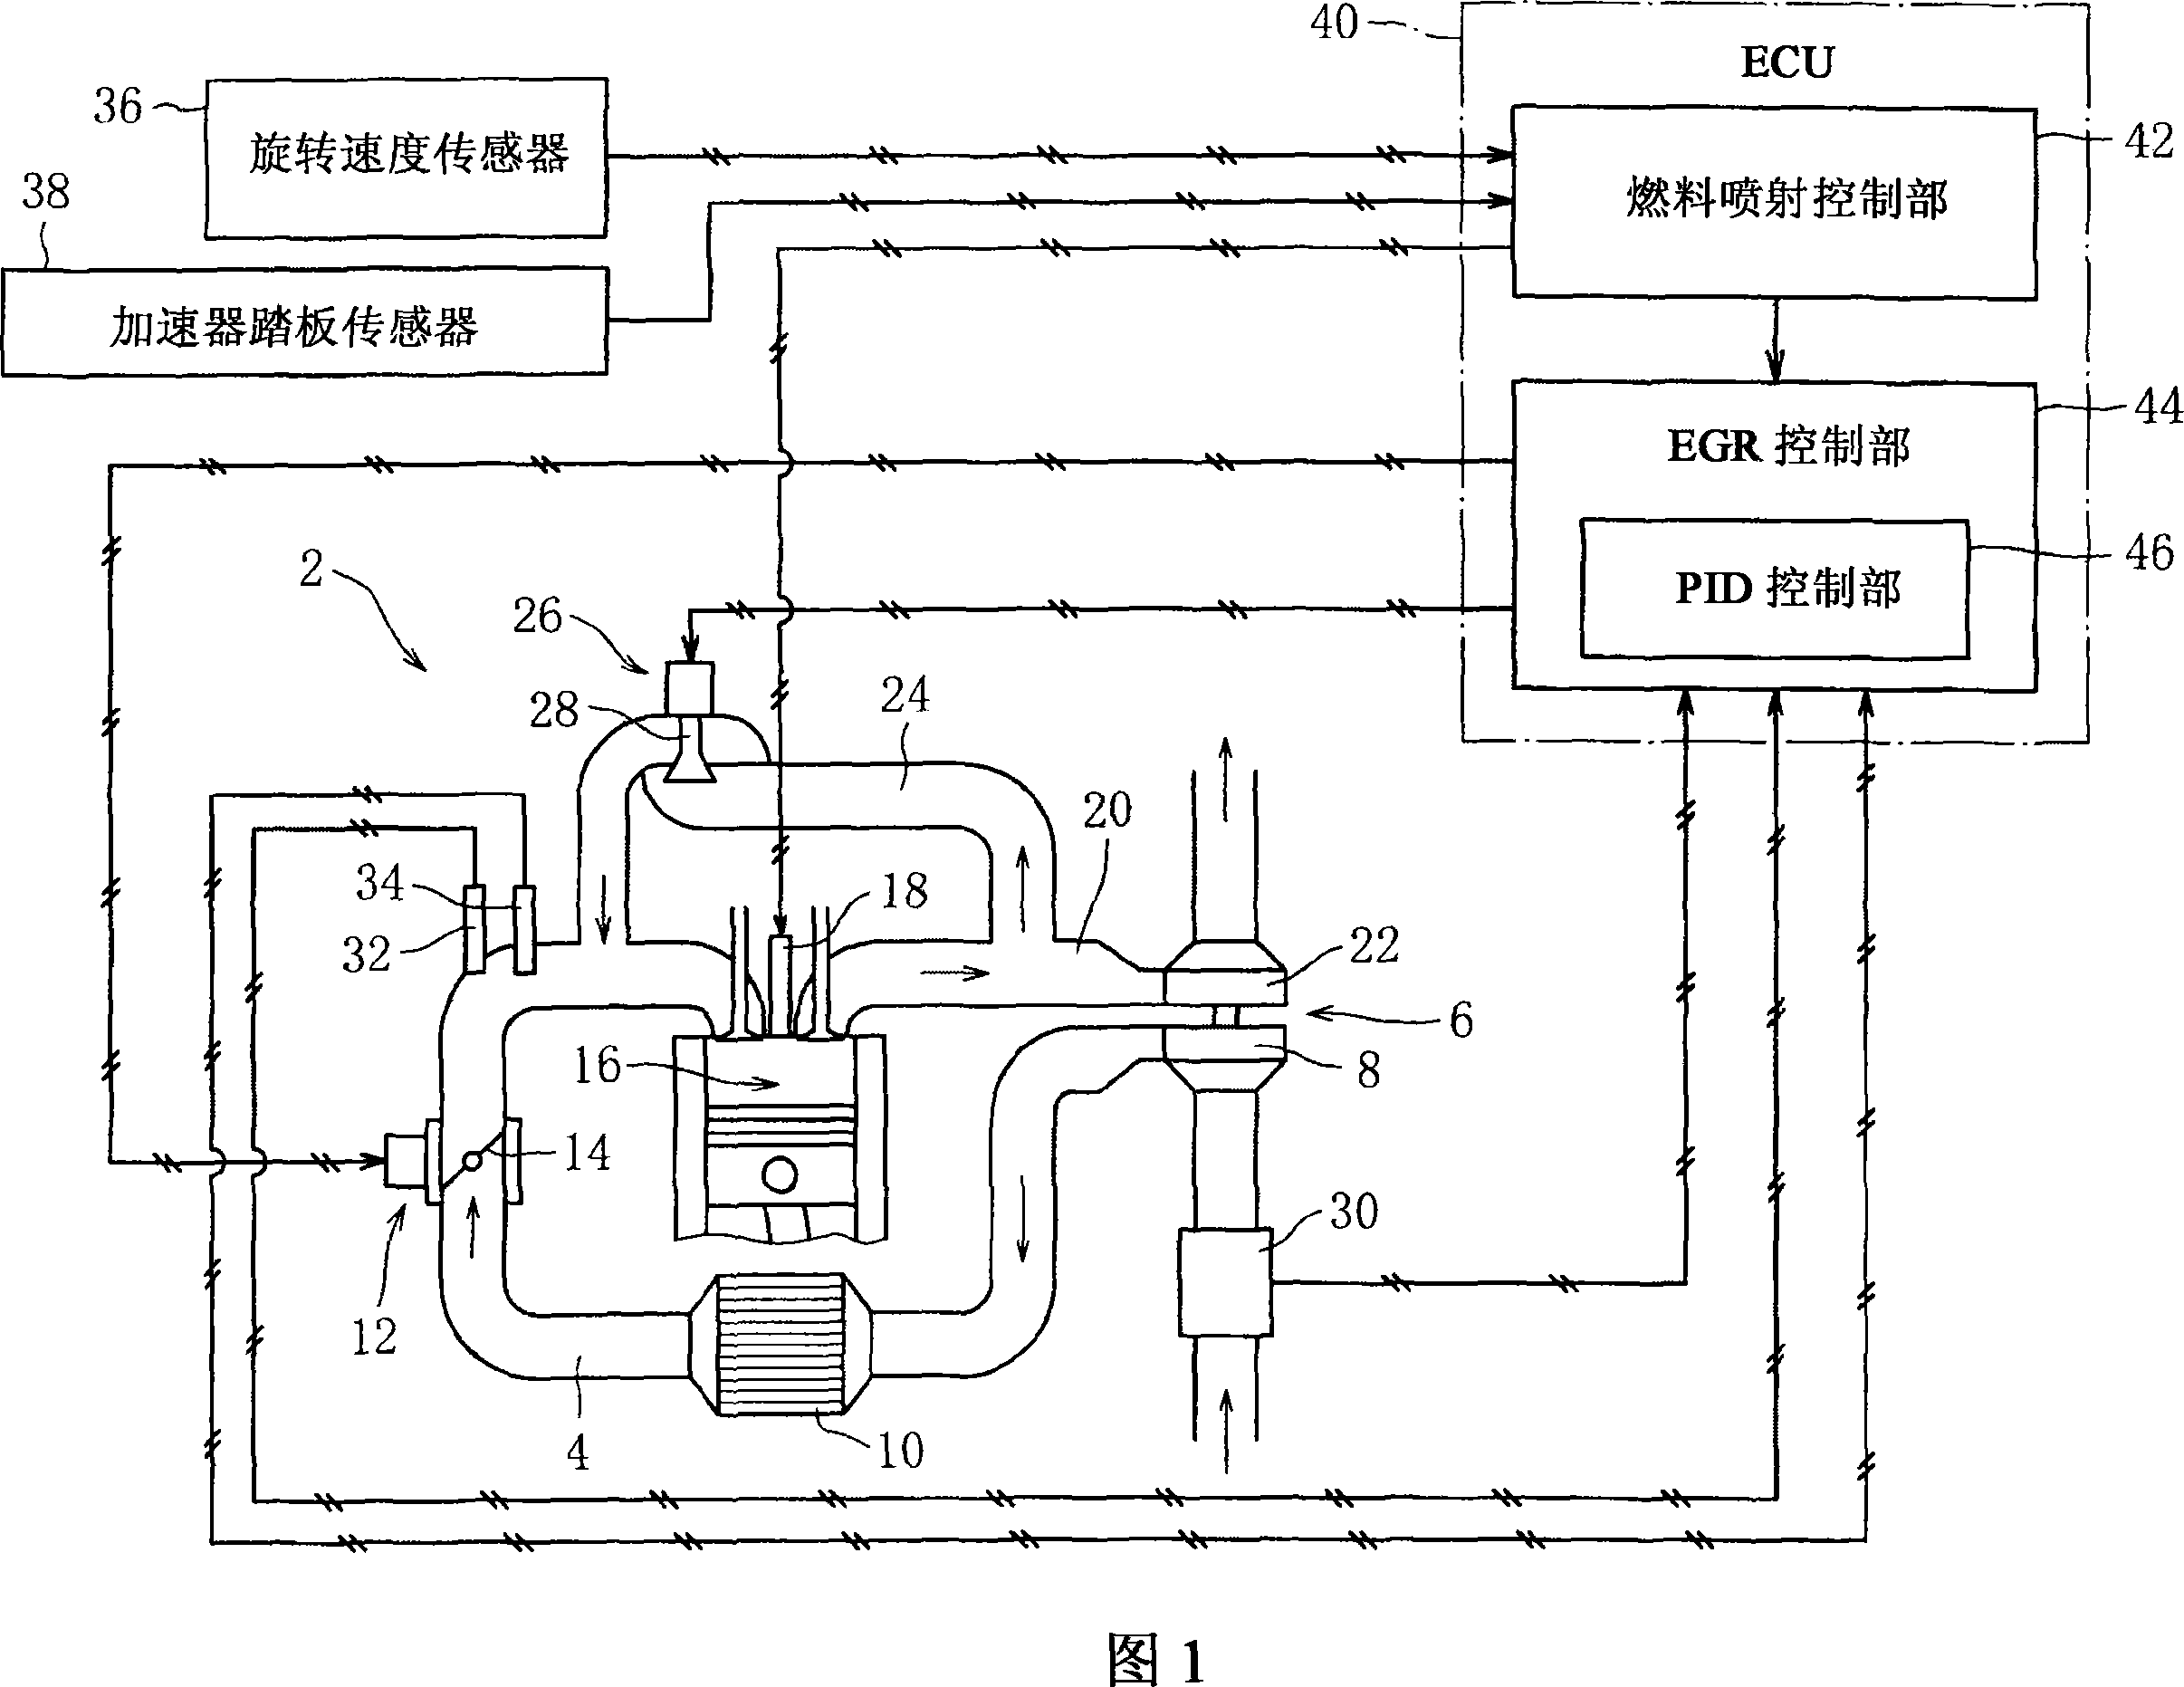 Egr control device for internal combustion engine